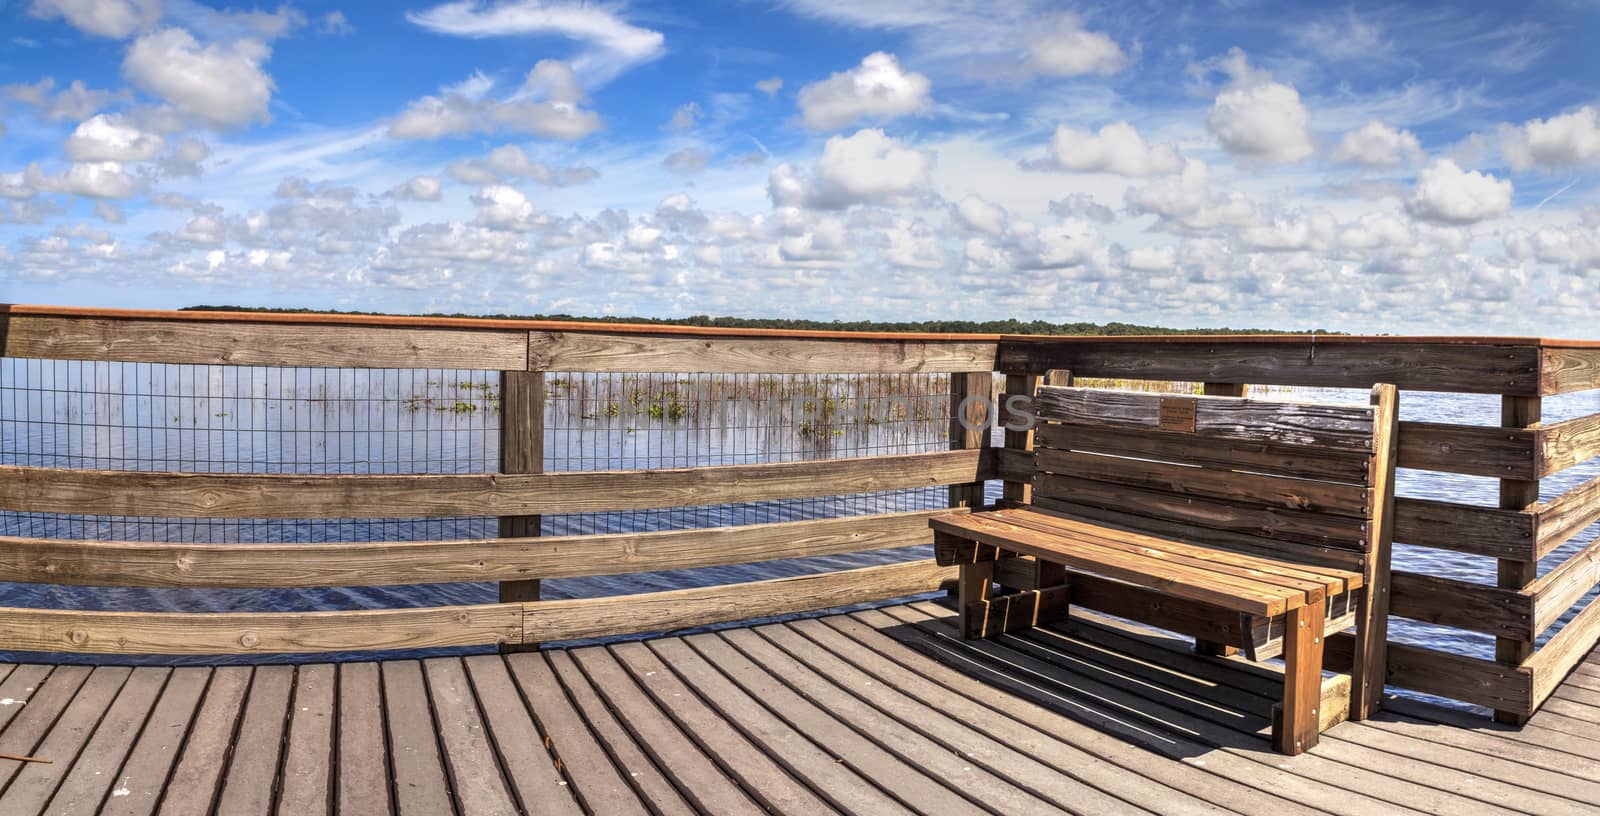 Boardwalk with benches overlooking the flooded swamp of Myakka River State Park in Sarasota, Florida.